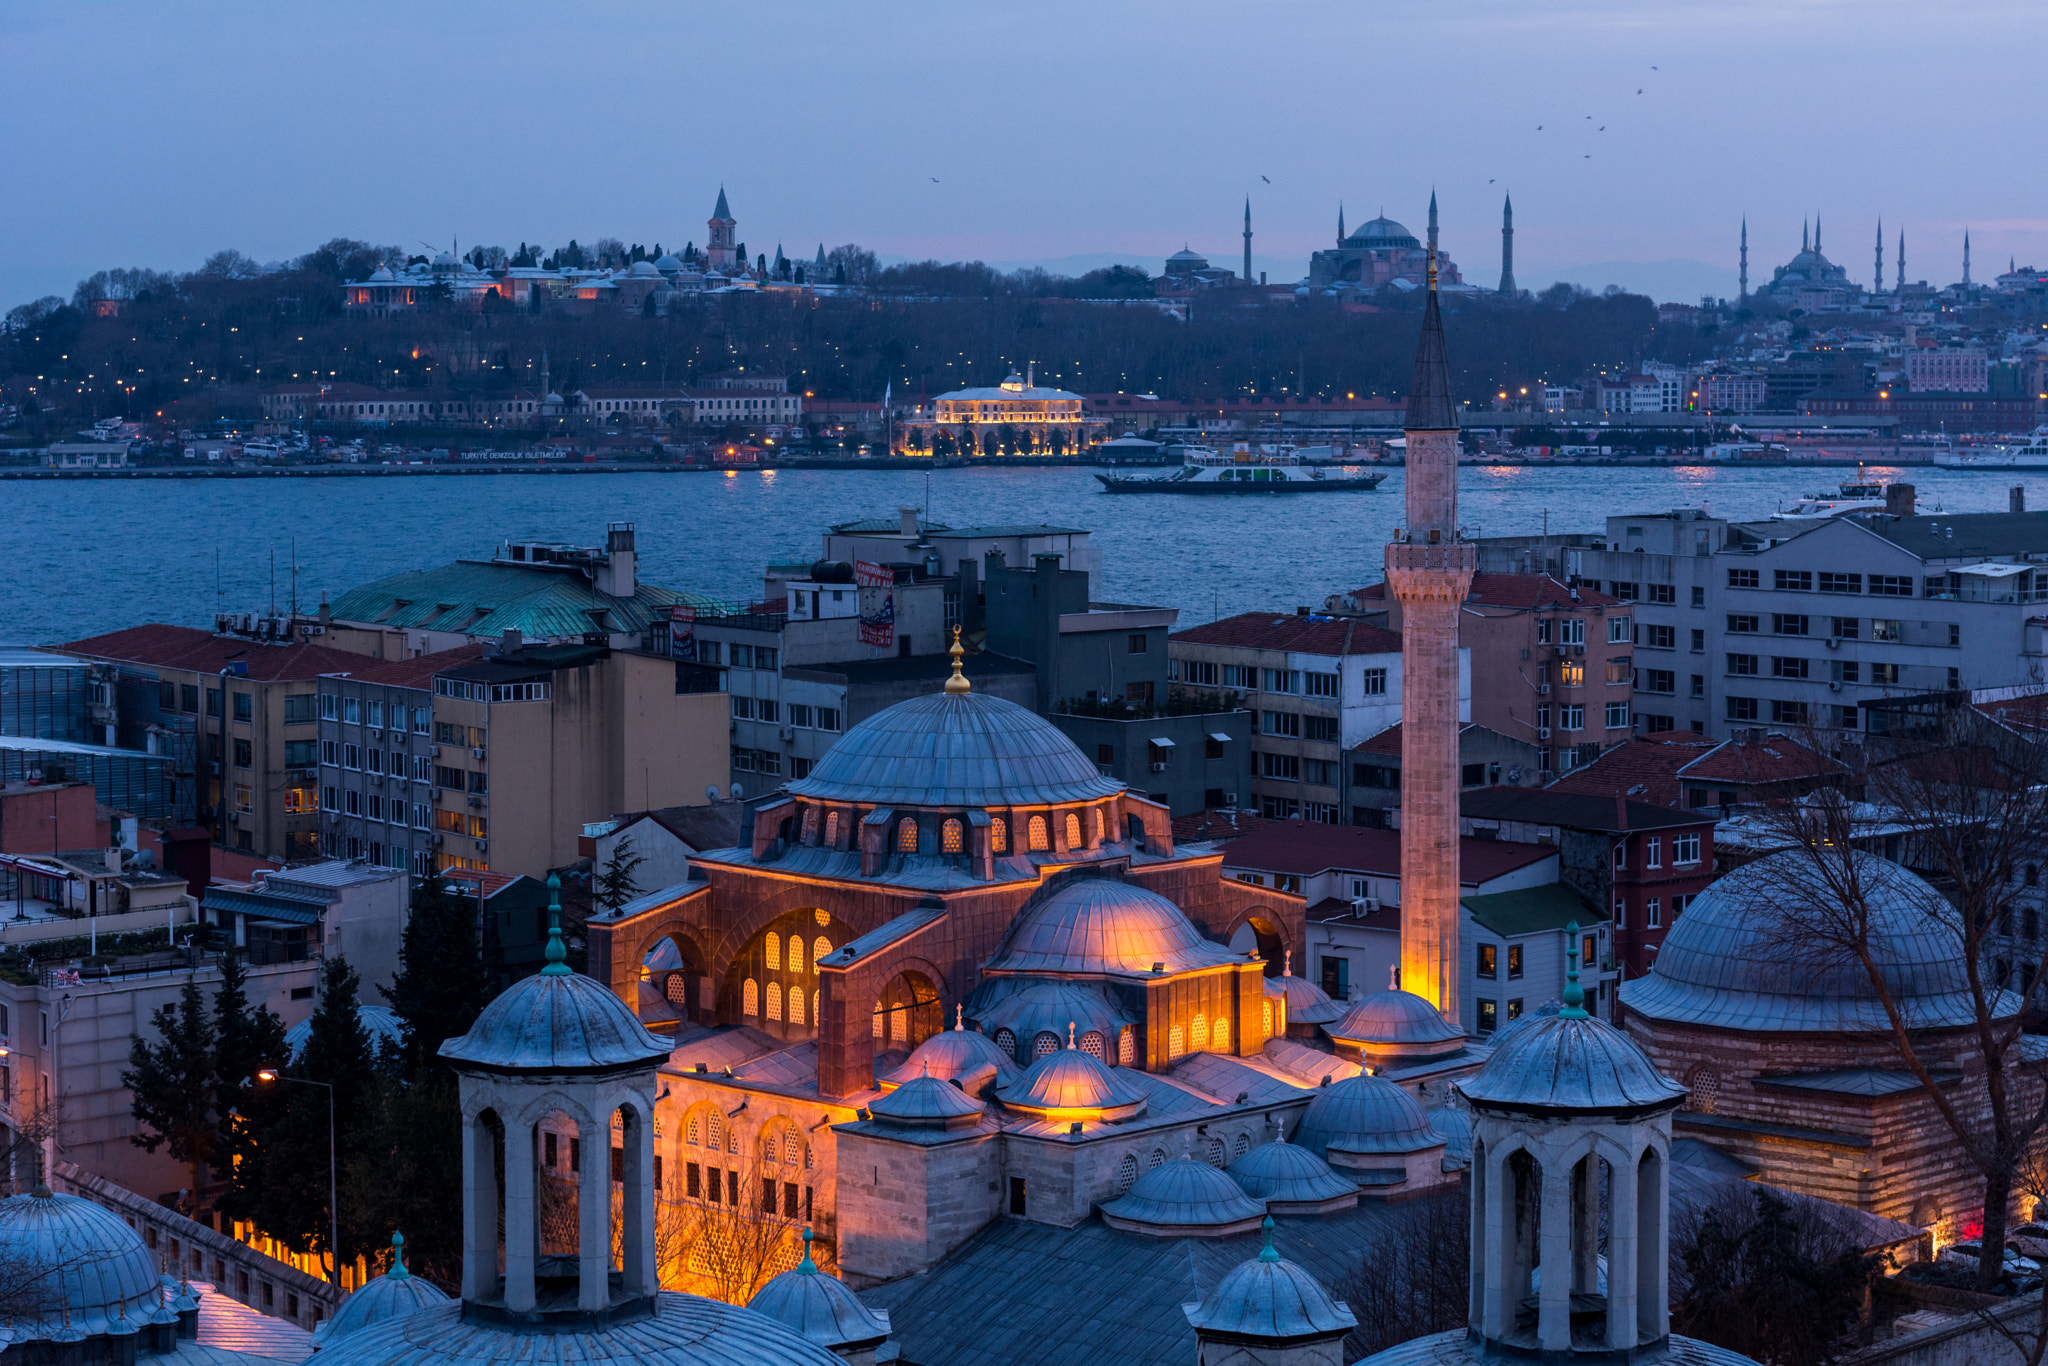 Nikon D7100 + Nikon AF-S Nikkor 24-70mm F2.8G ED sample photo. View from tophane-i amire istanbul photography